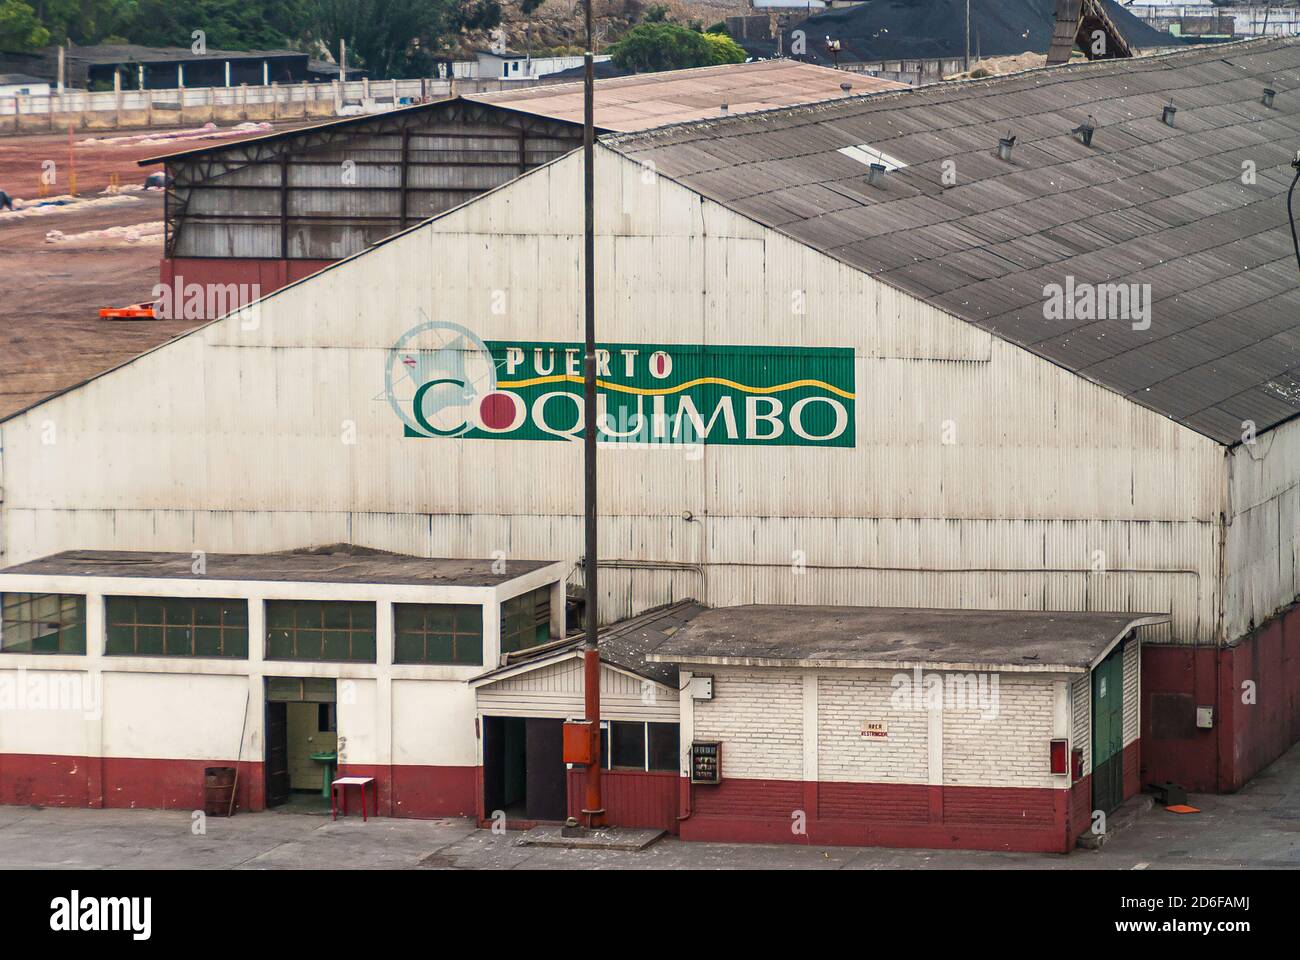 Coquimbo, Chile - December 7, 2008: White on green with red dots Puerto Coquimbo emblem on large white warehouse in port. Stock Photo